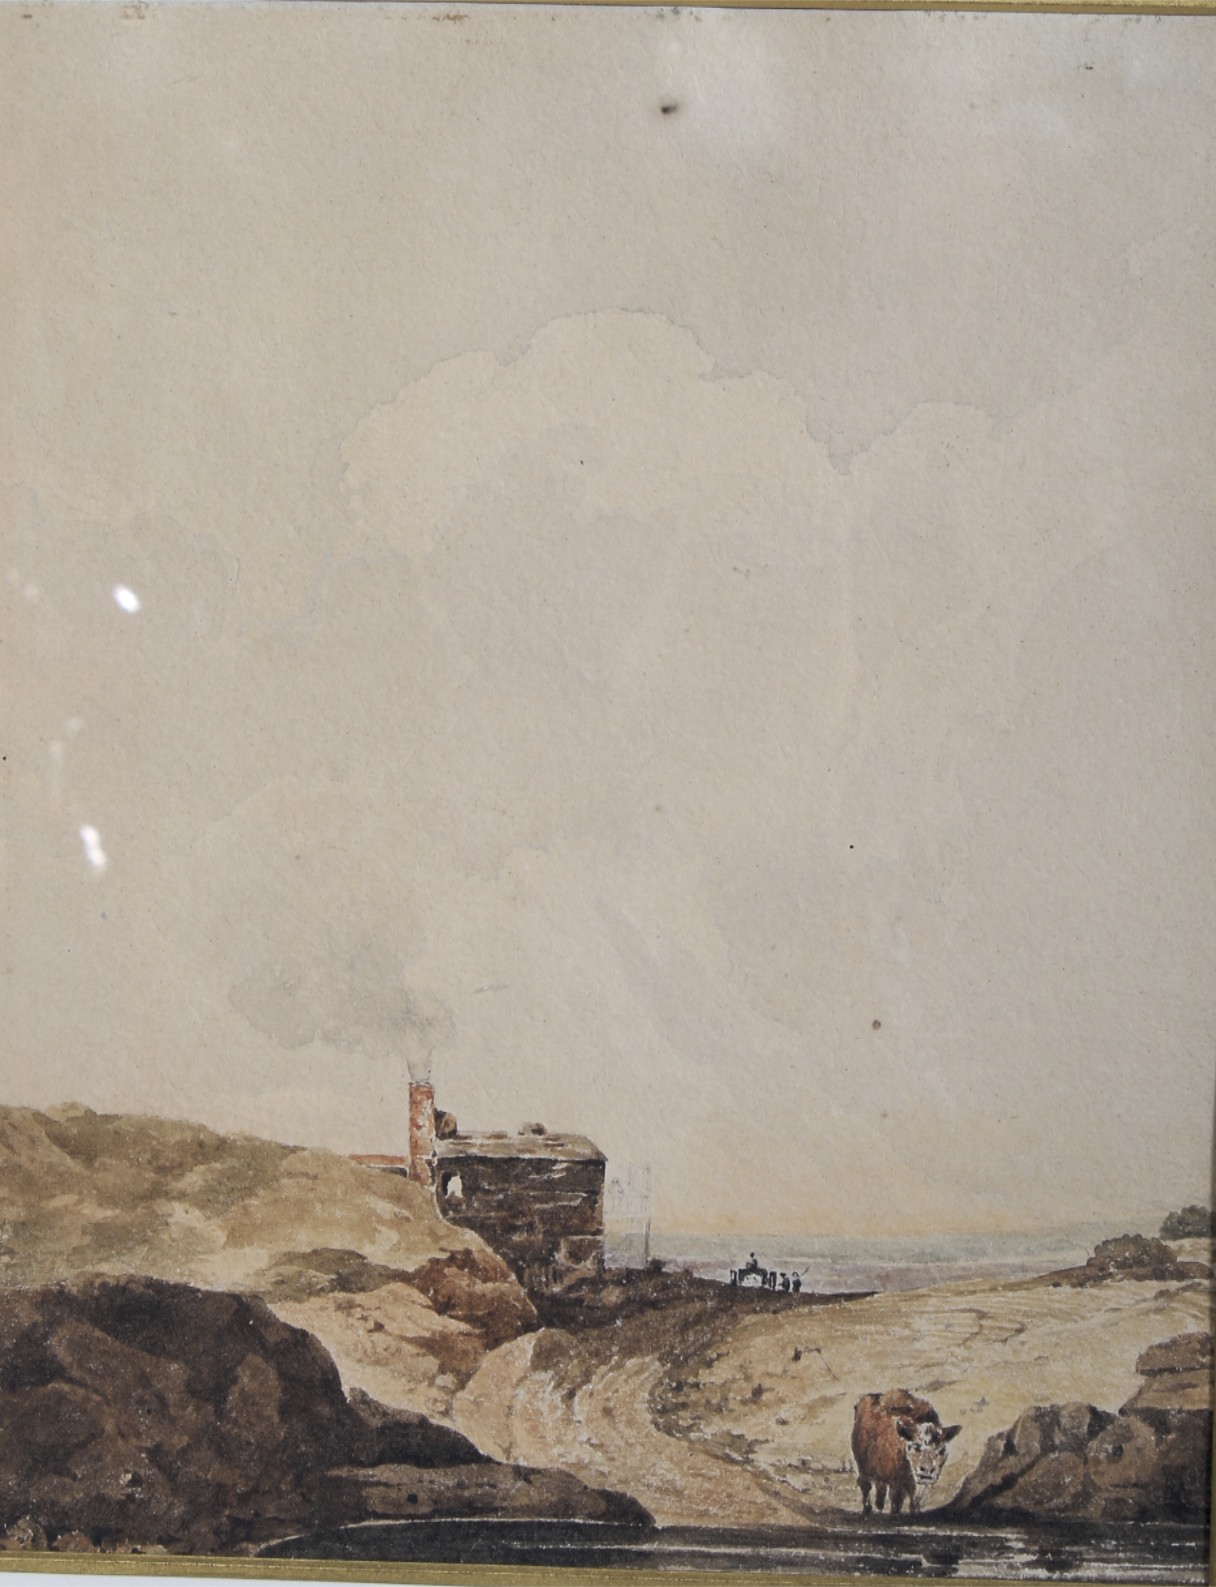 Attributed to Frederic Charles Winby (1875-1959), Mining Landscape. Watercolour on paper. - Image 2 of 3